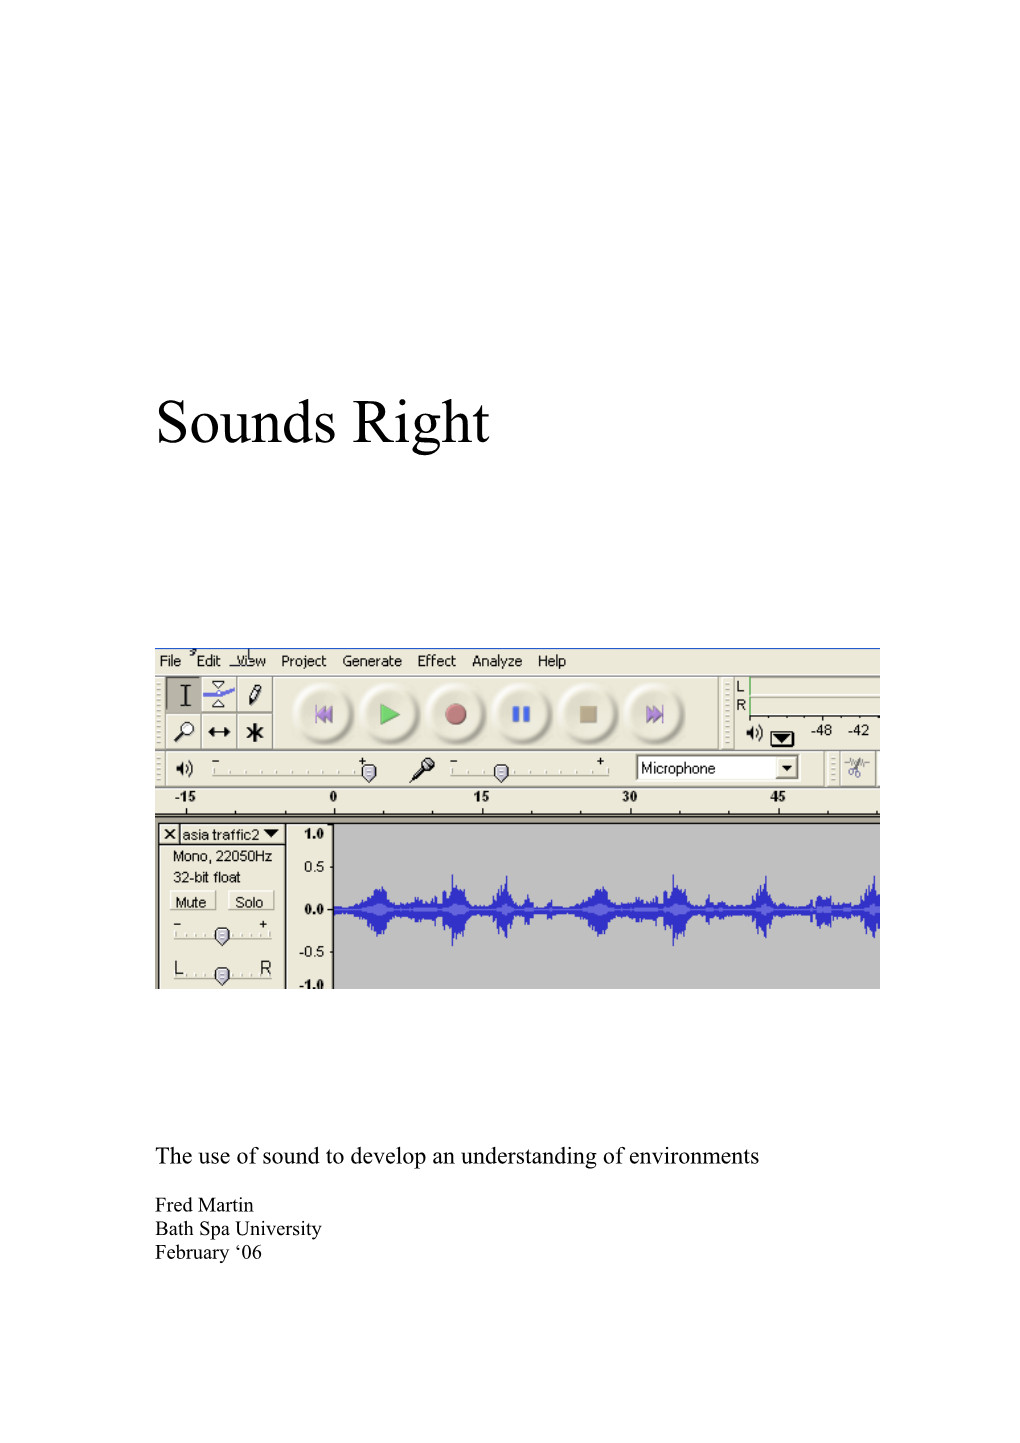 The Use of Sound to Develop an Understanding of Environments